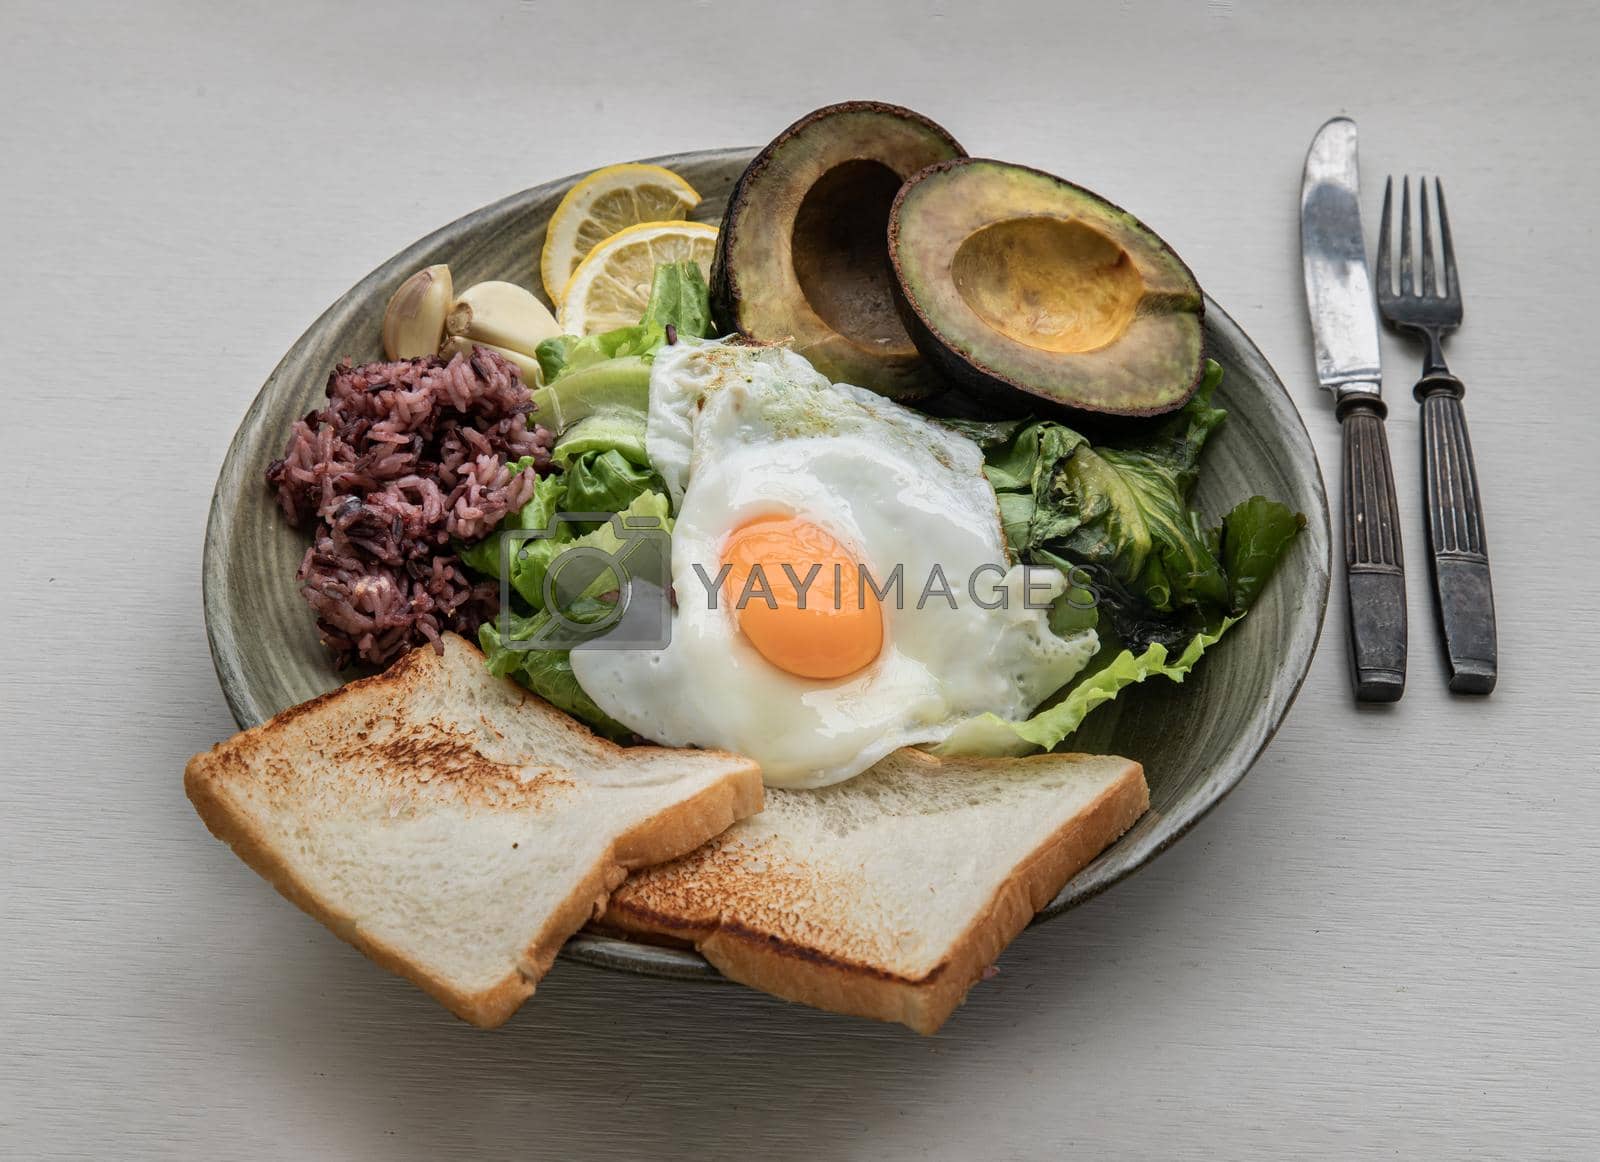 Royalty free image of Breakfast with Fried Egg to put it on top of Fresh vegetables, Rice berry, Breads, and Garlic with Avocado cut in half and lemon sliced on Ceramic plate.  by tosirikul